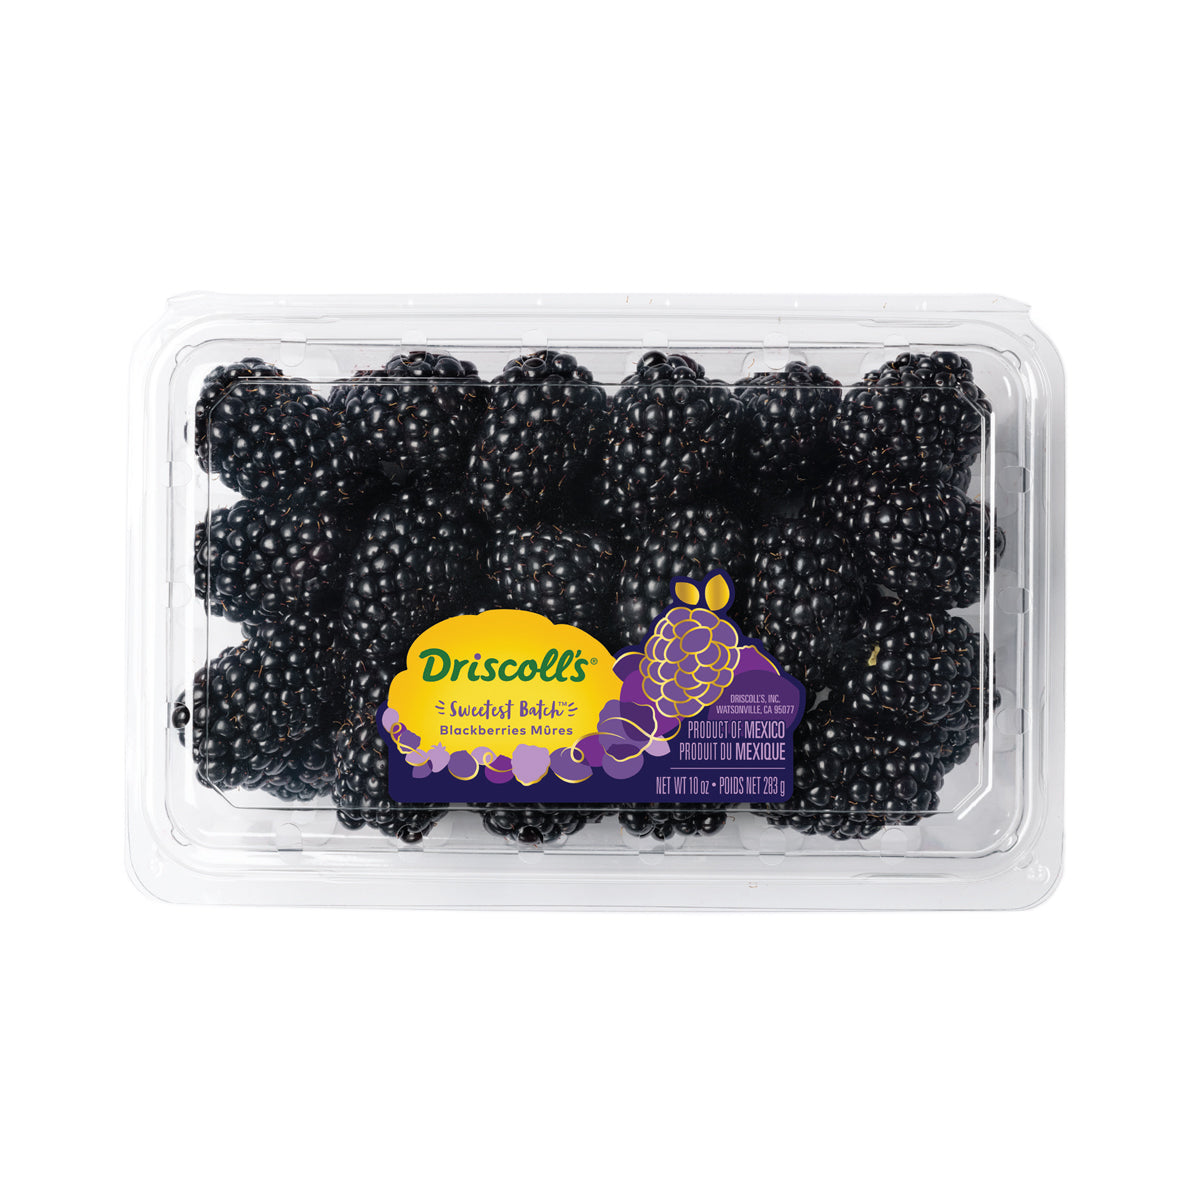 Driscoll'S Limited Edition Sweetest Batch Blackberries 10 OZ